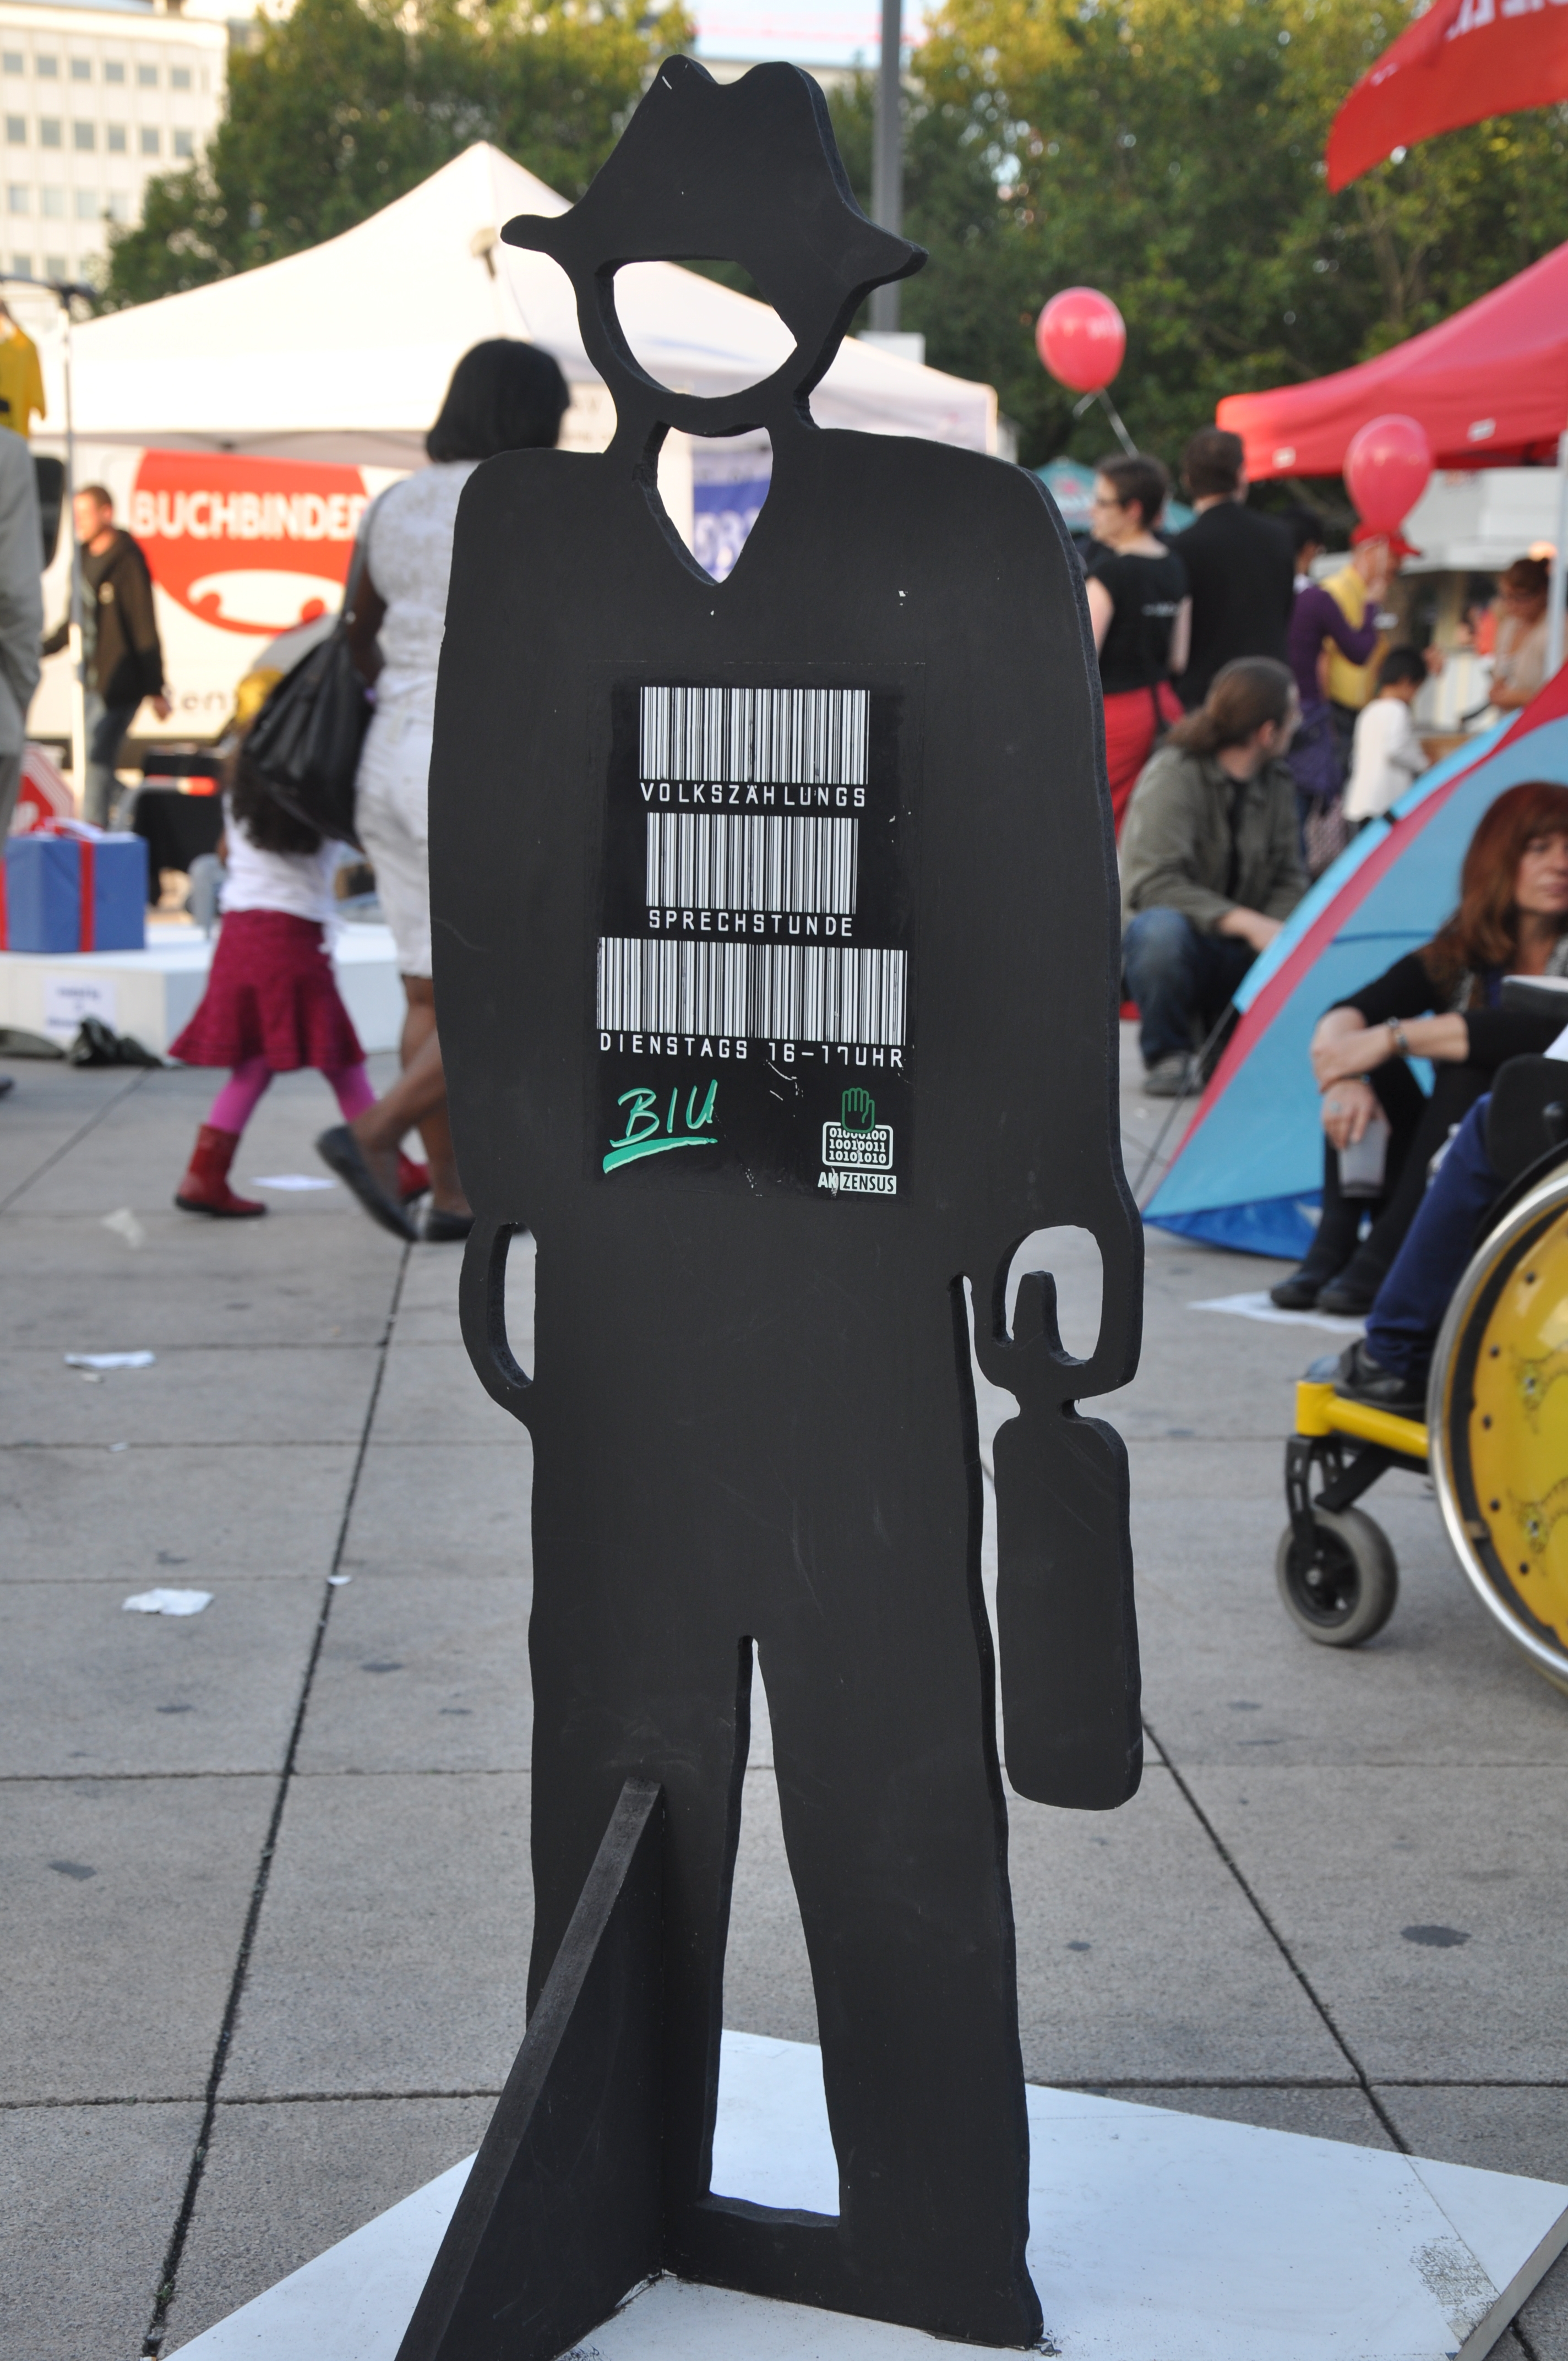 A cardboard stand in the shape of a man with barcodes printed on it